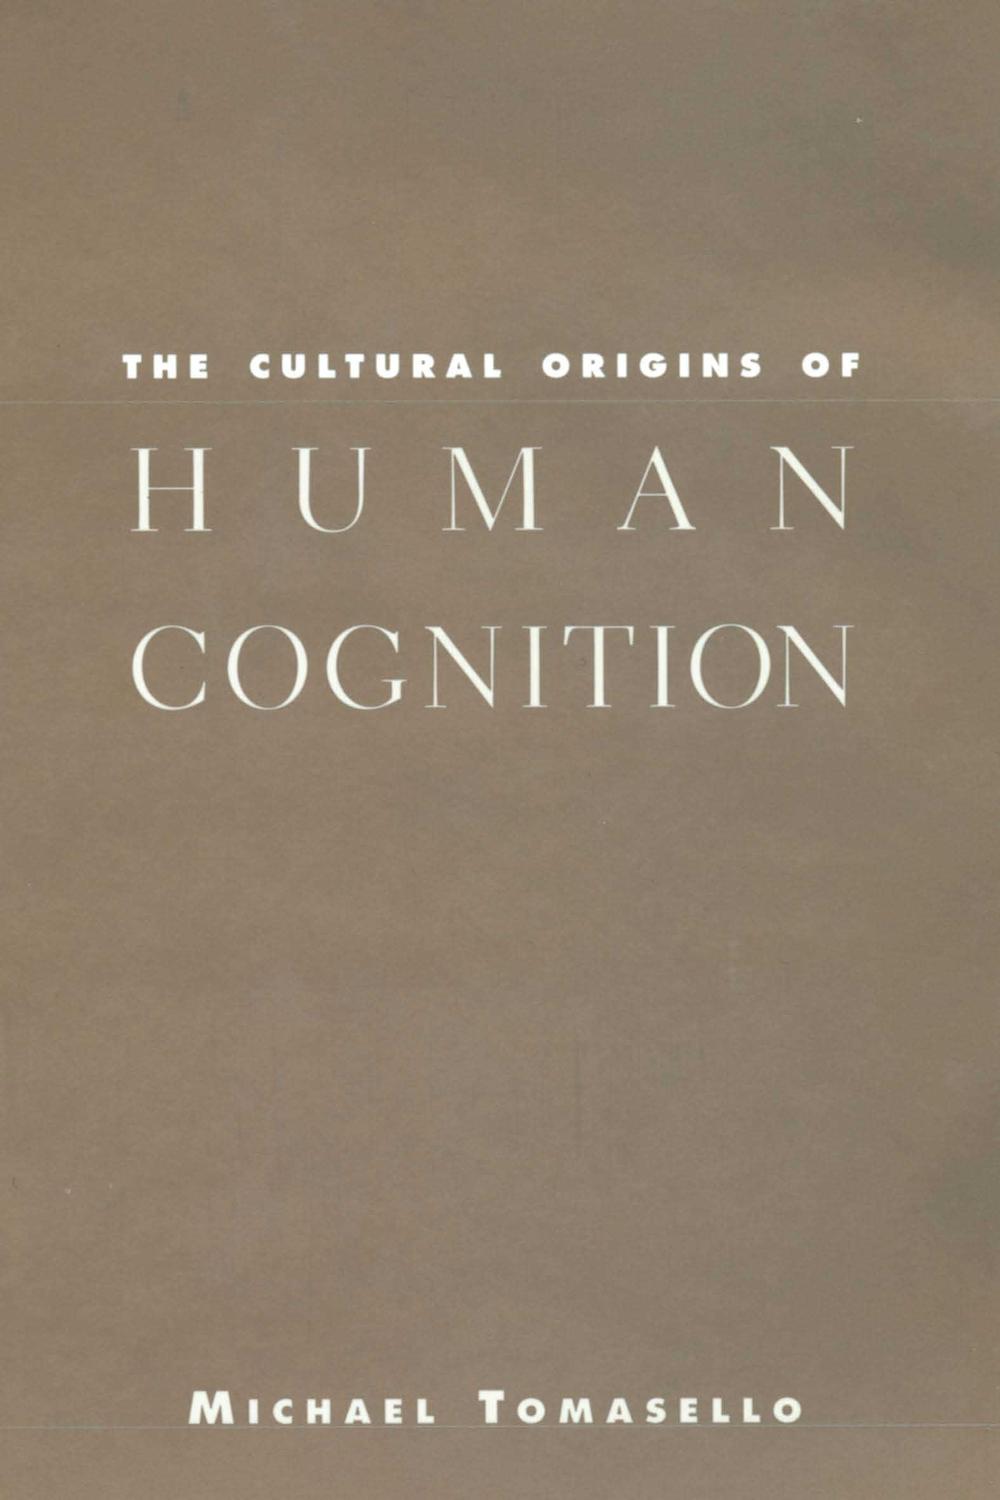 The Cultural Origins of Human Cognition - Michael Tomasello